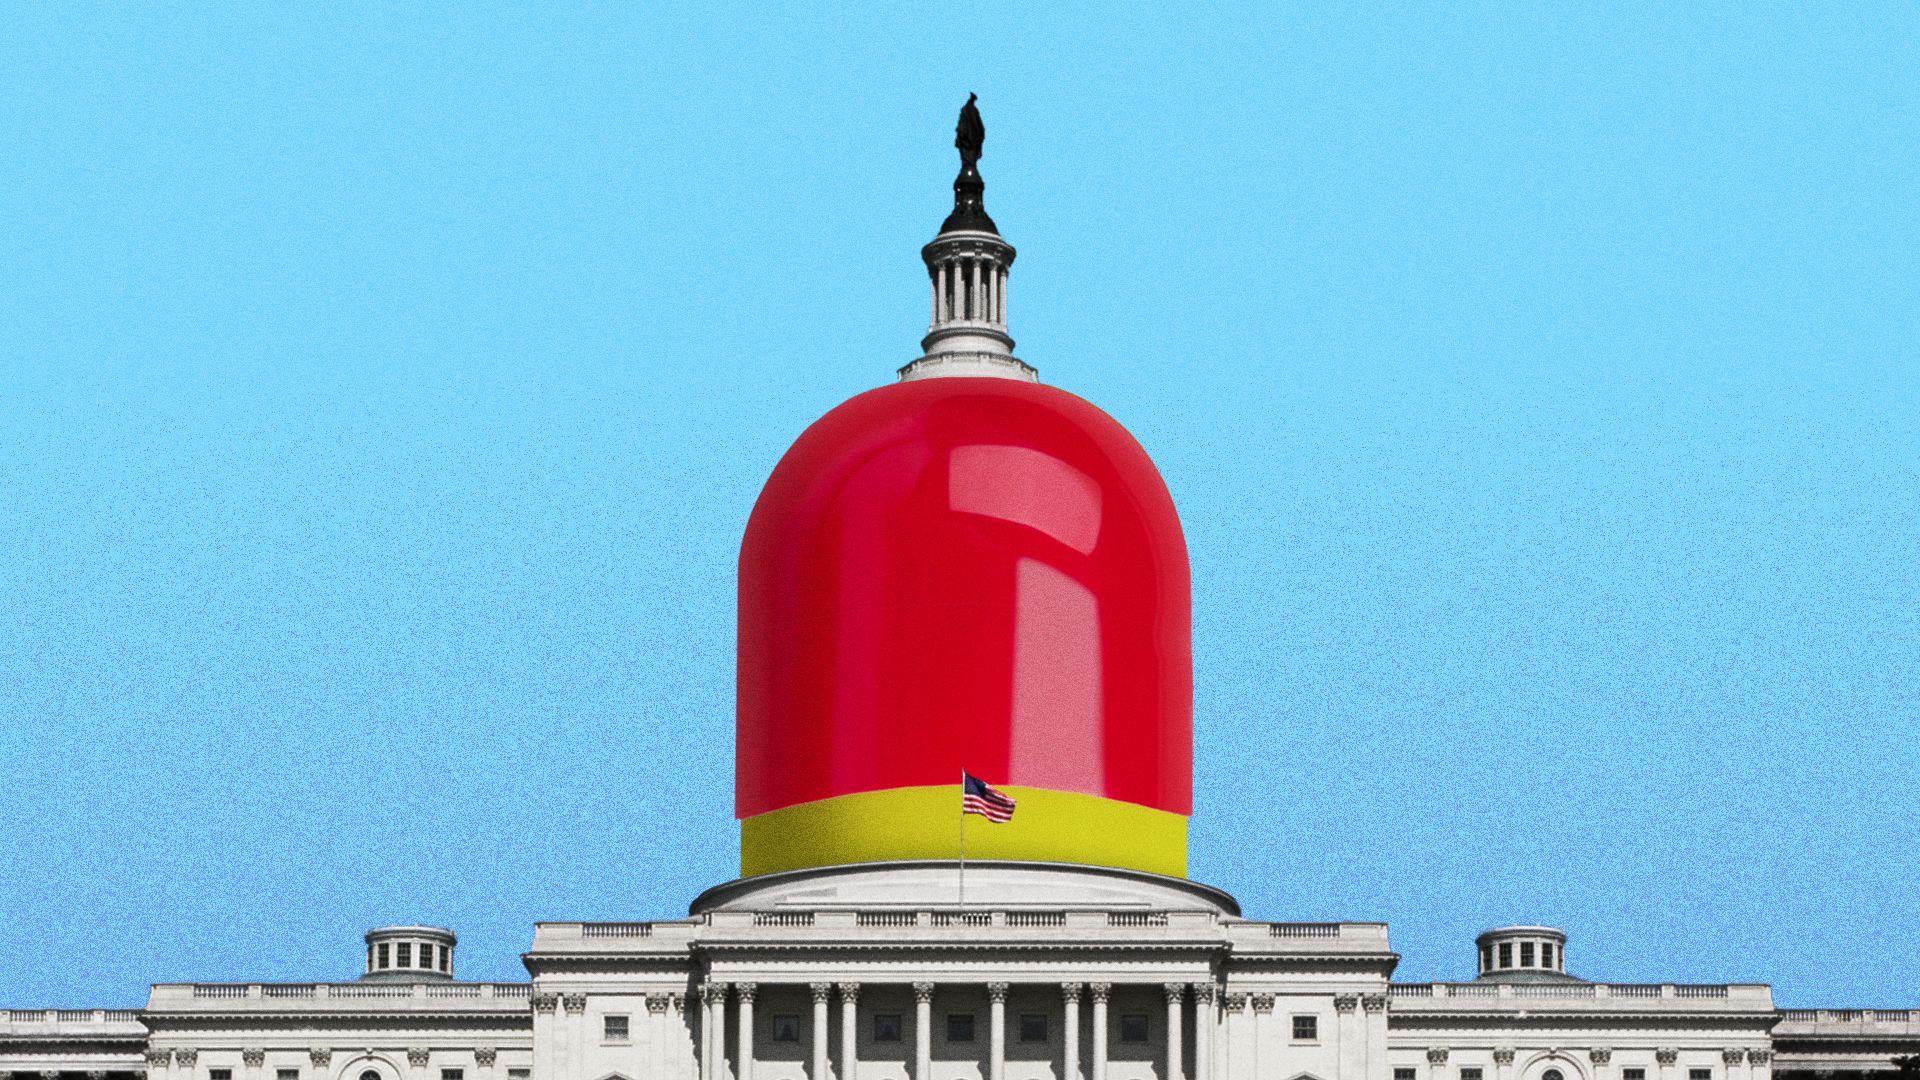 Illustration with the dome of the US Capitol building replaced with a red and yellow pill capsule.